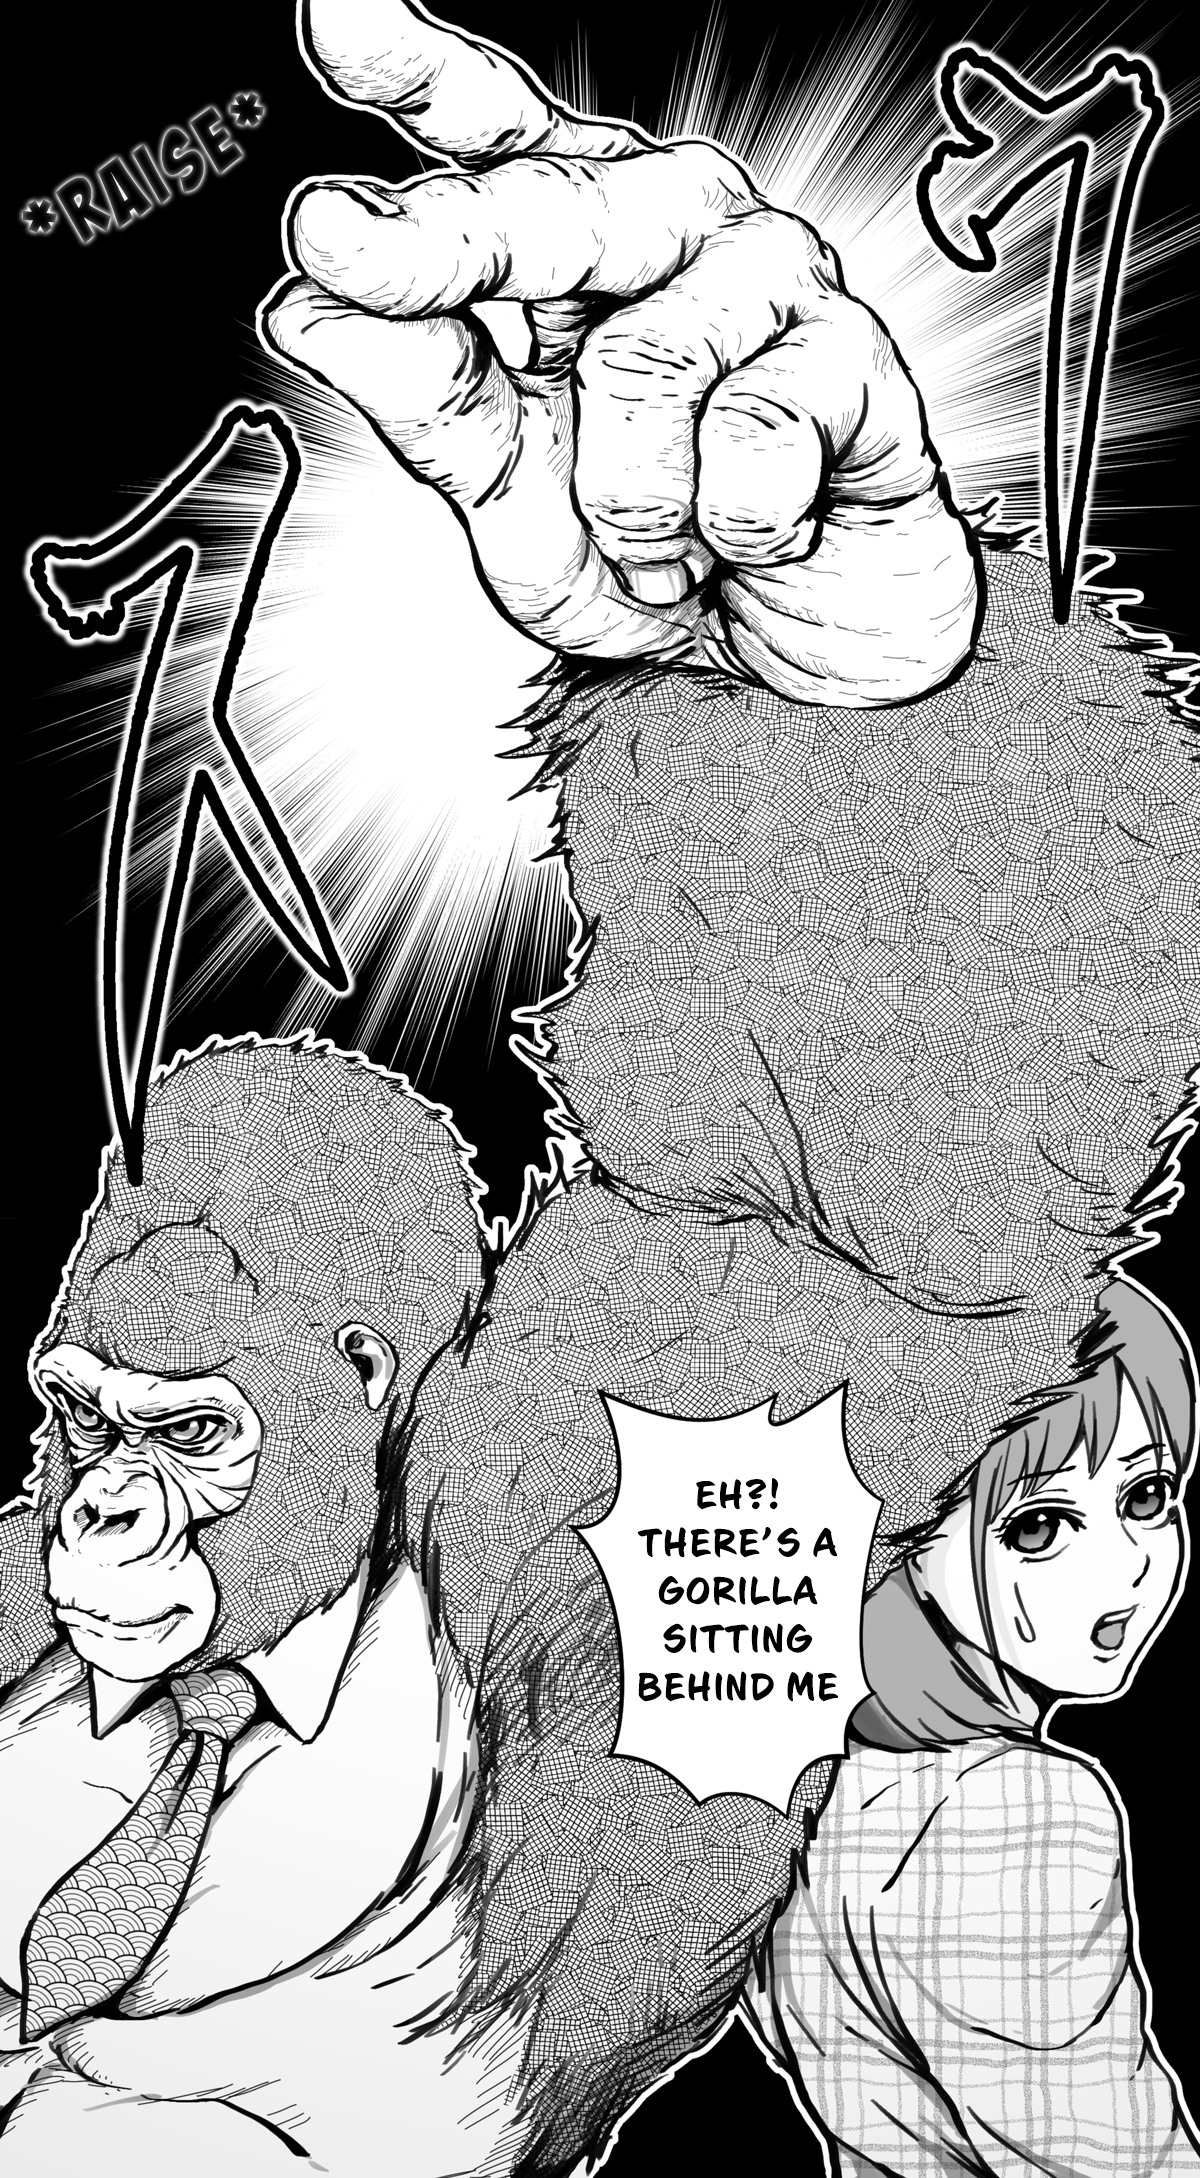 An Extremely Attractive Gorilla - Page 2